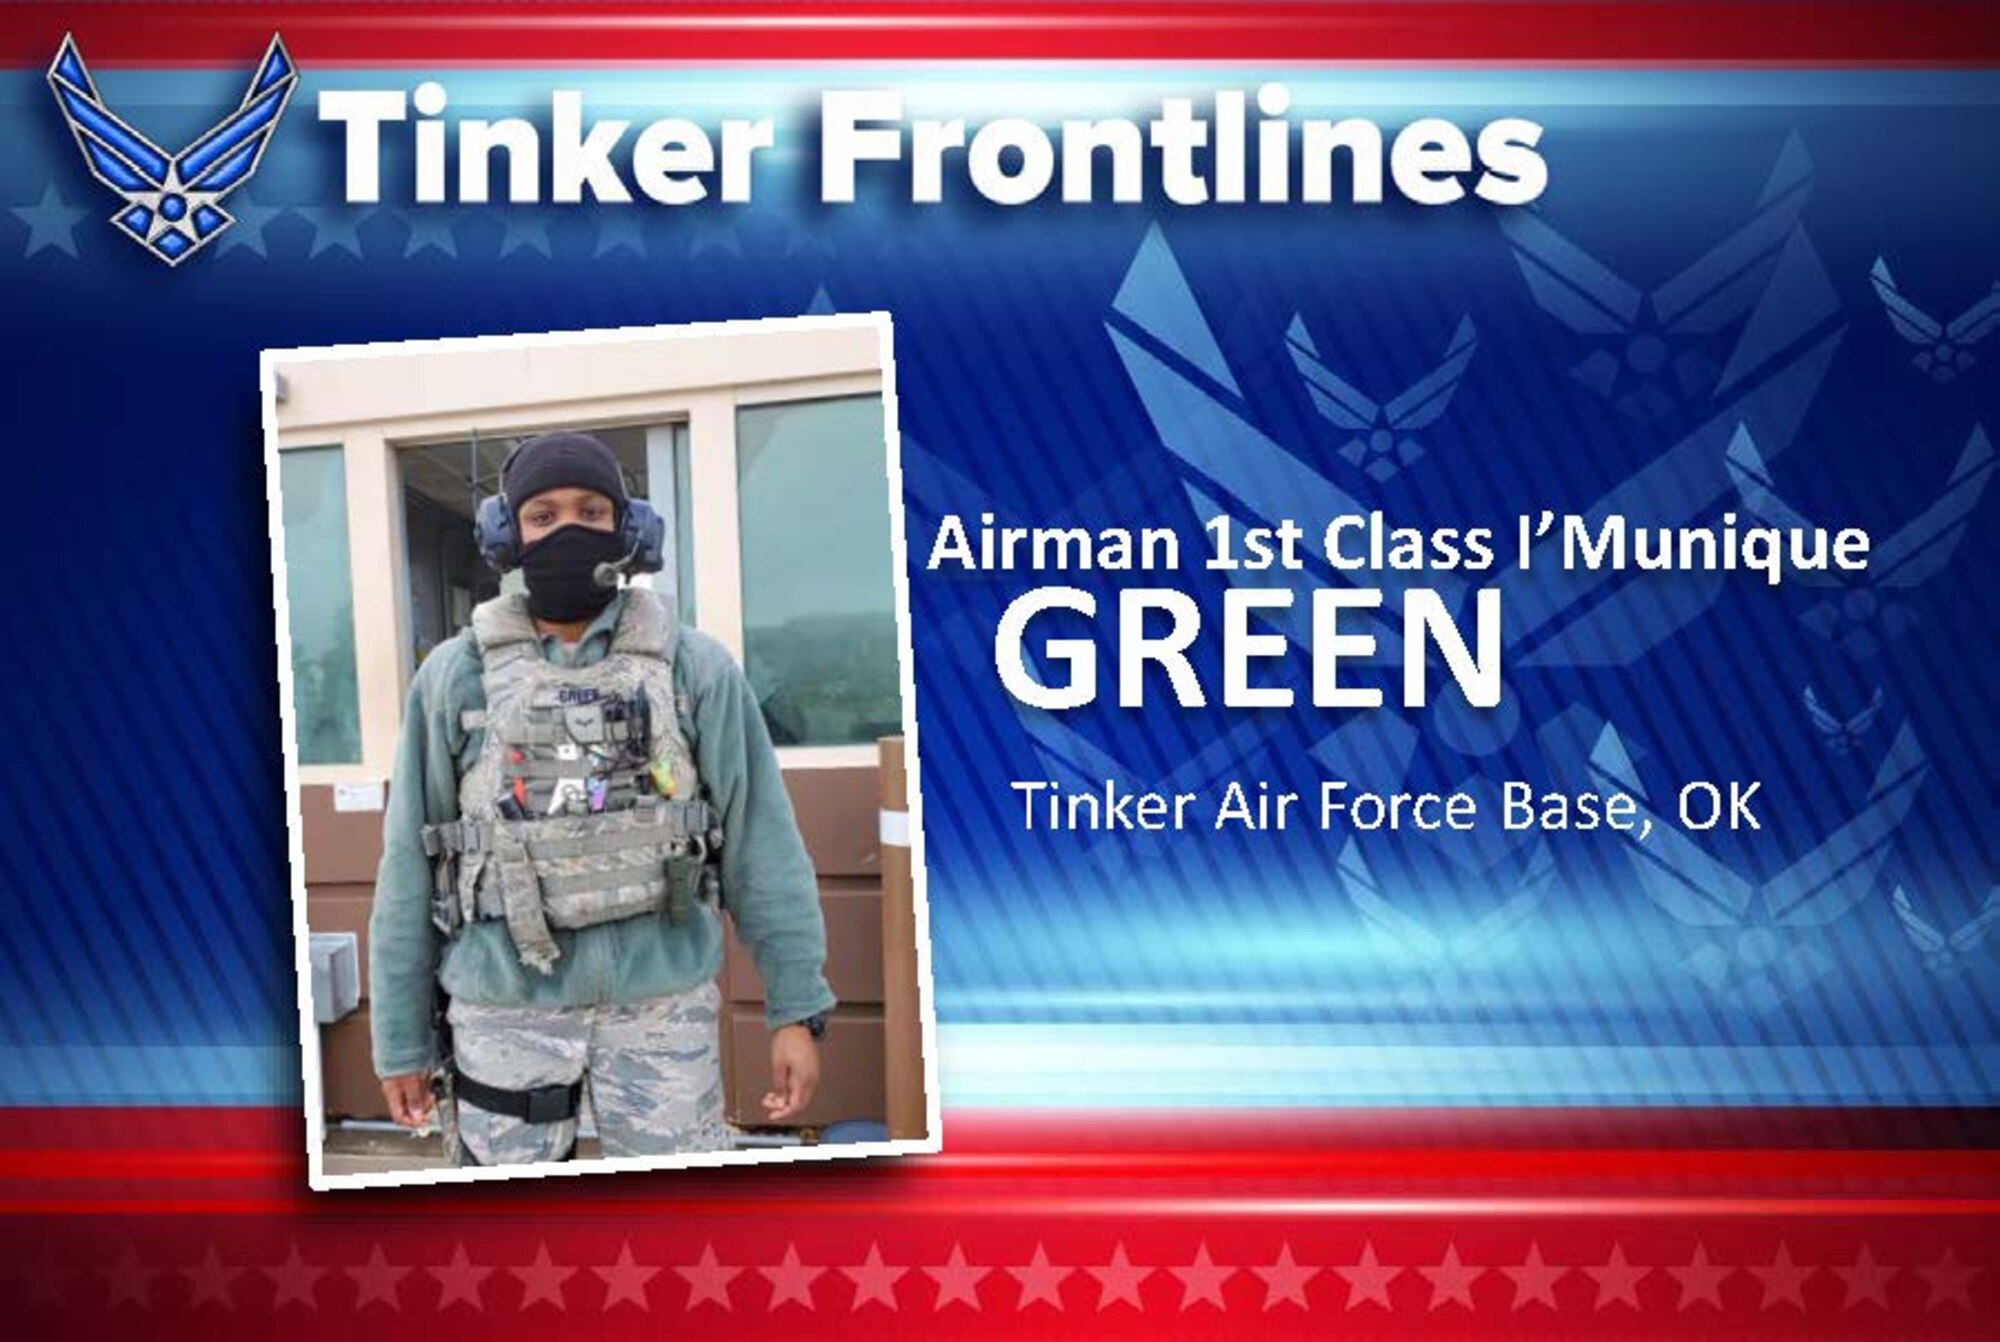 Airman 1st Class I'Munique Green serves as a vehicle search area member with the 72nd Security Forces Squadron.